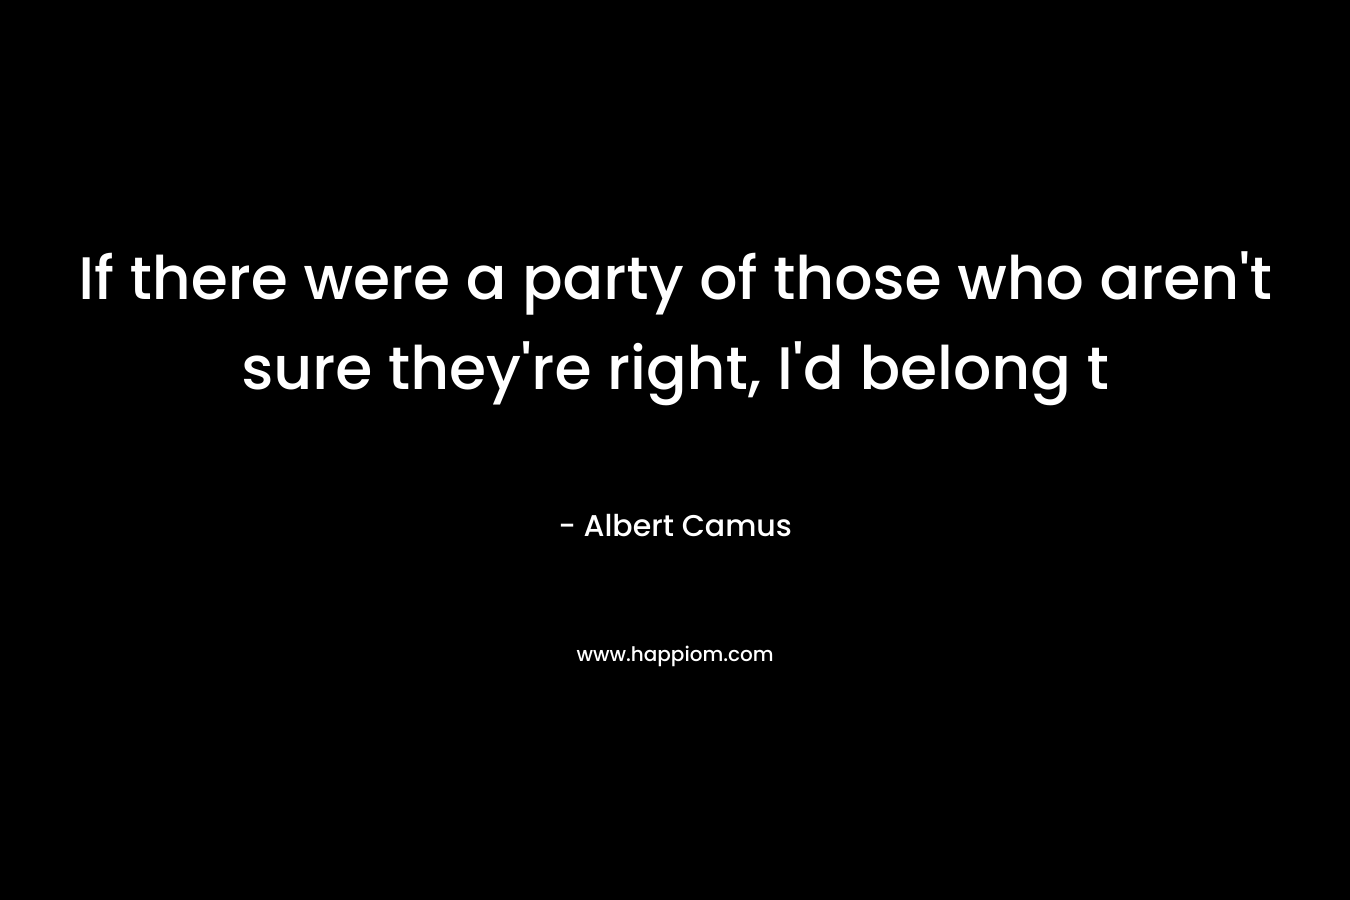 If there were a party of those who aren’t sure they’re right, I’d belong t – Albert Camus